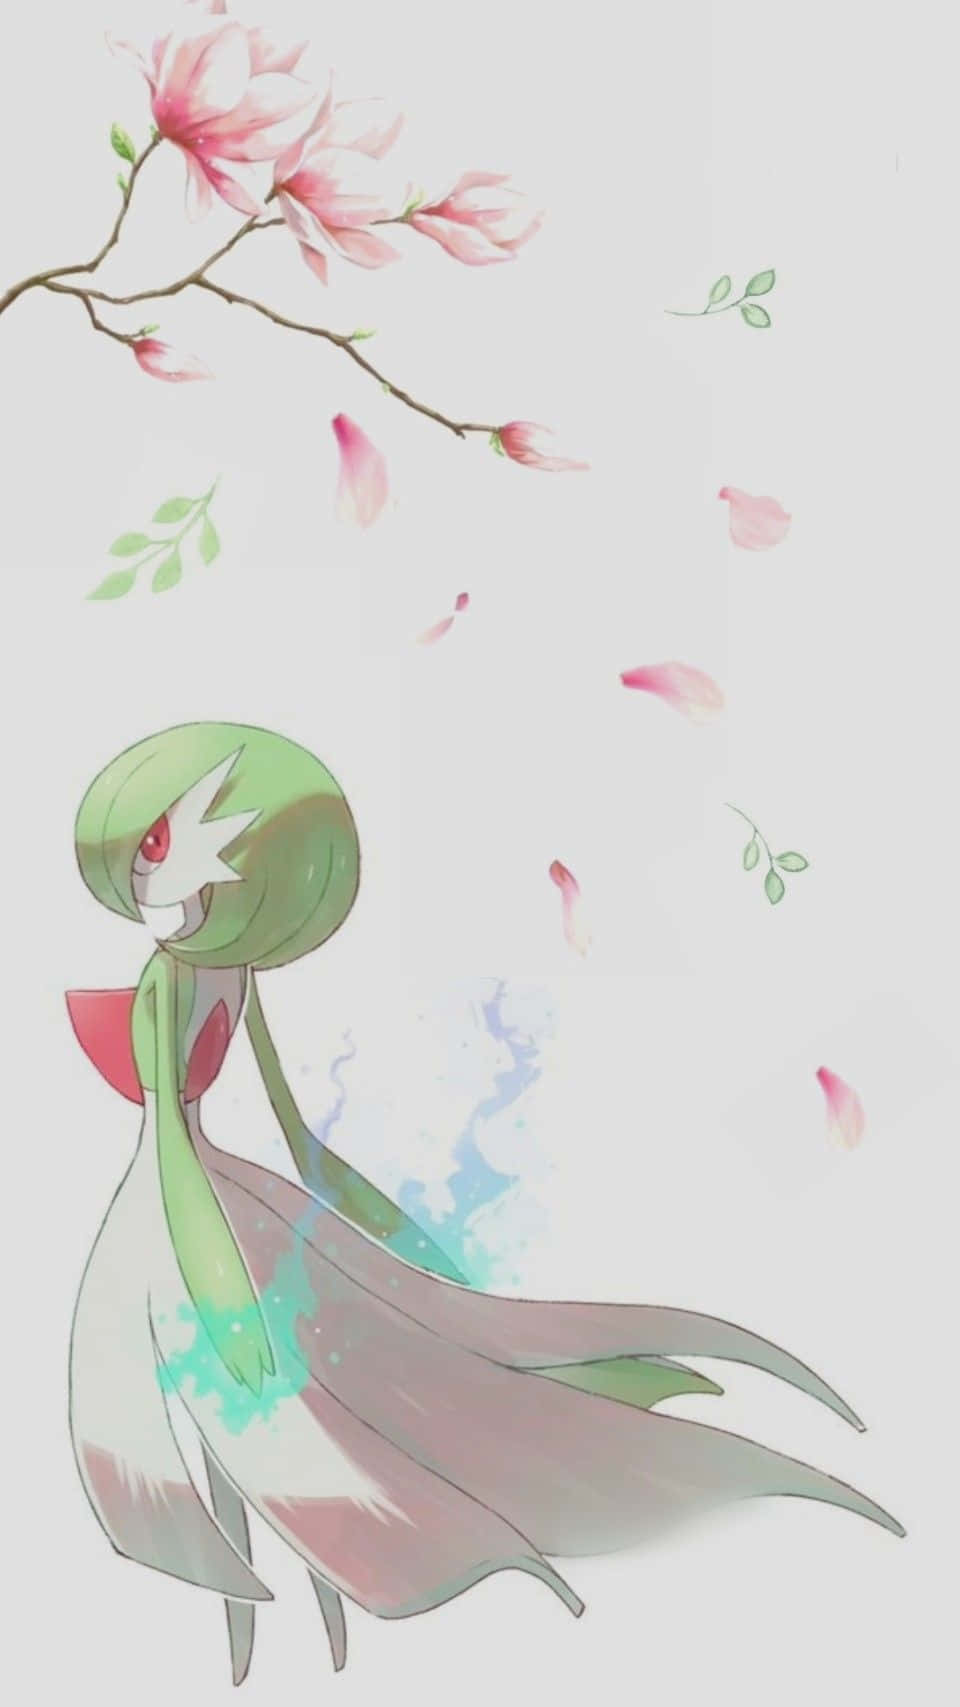 Cute Gardevoir With Cherry Blossom Picture